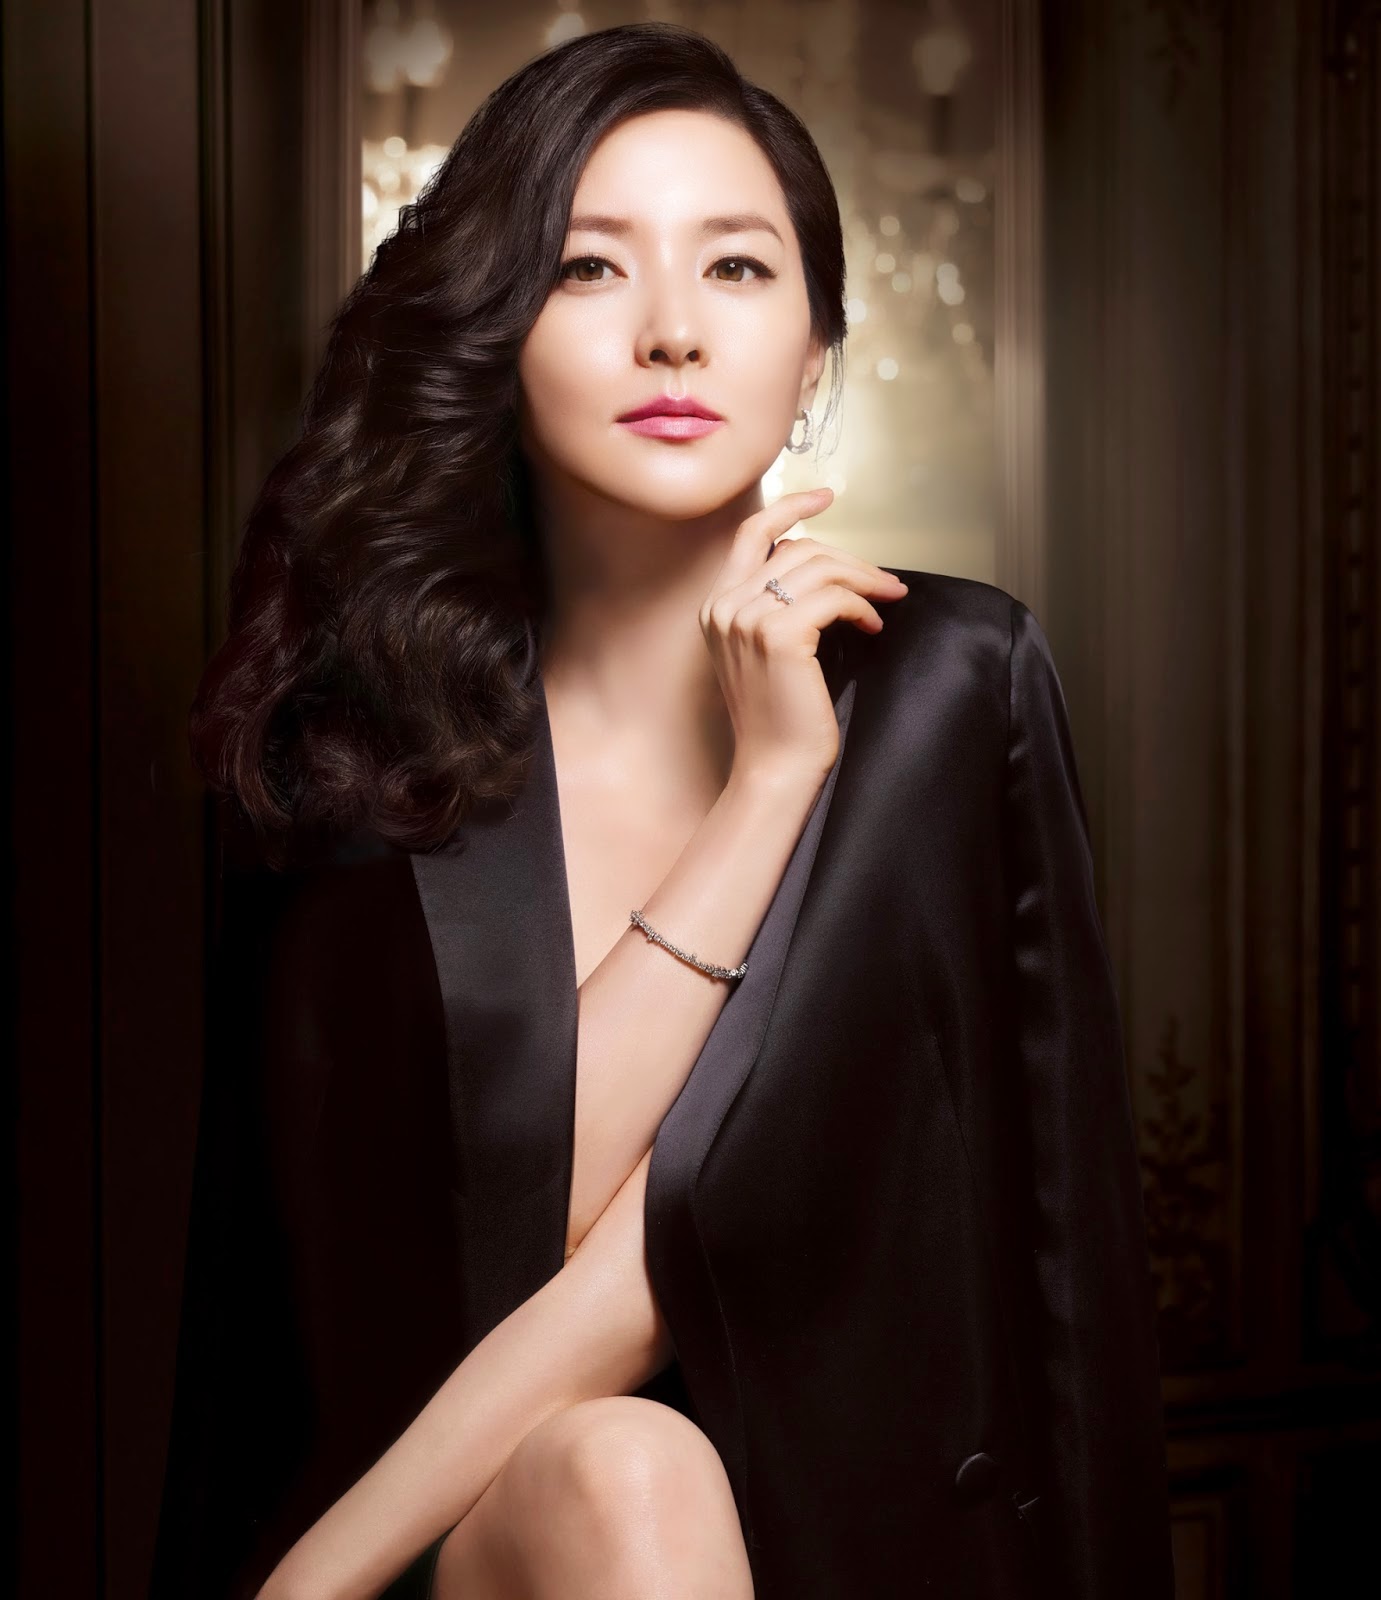 Lee Young-ae (이영애) | Some Dramas/Actors | Pinterest